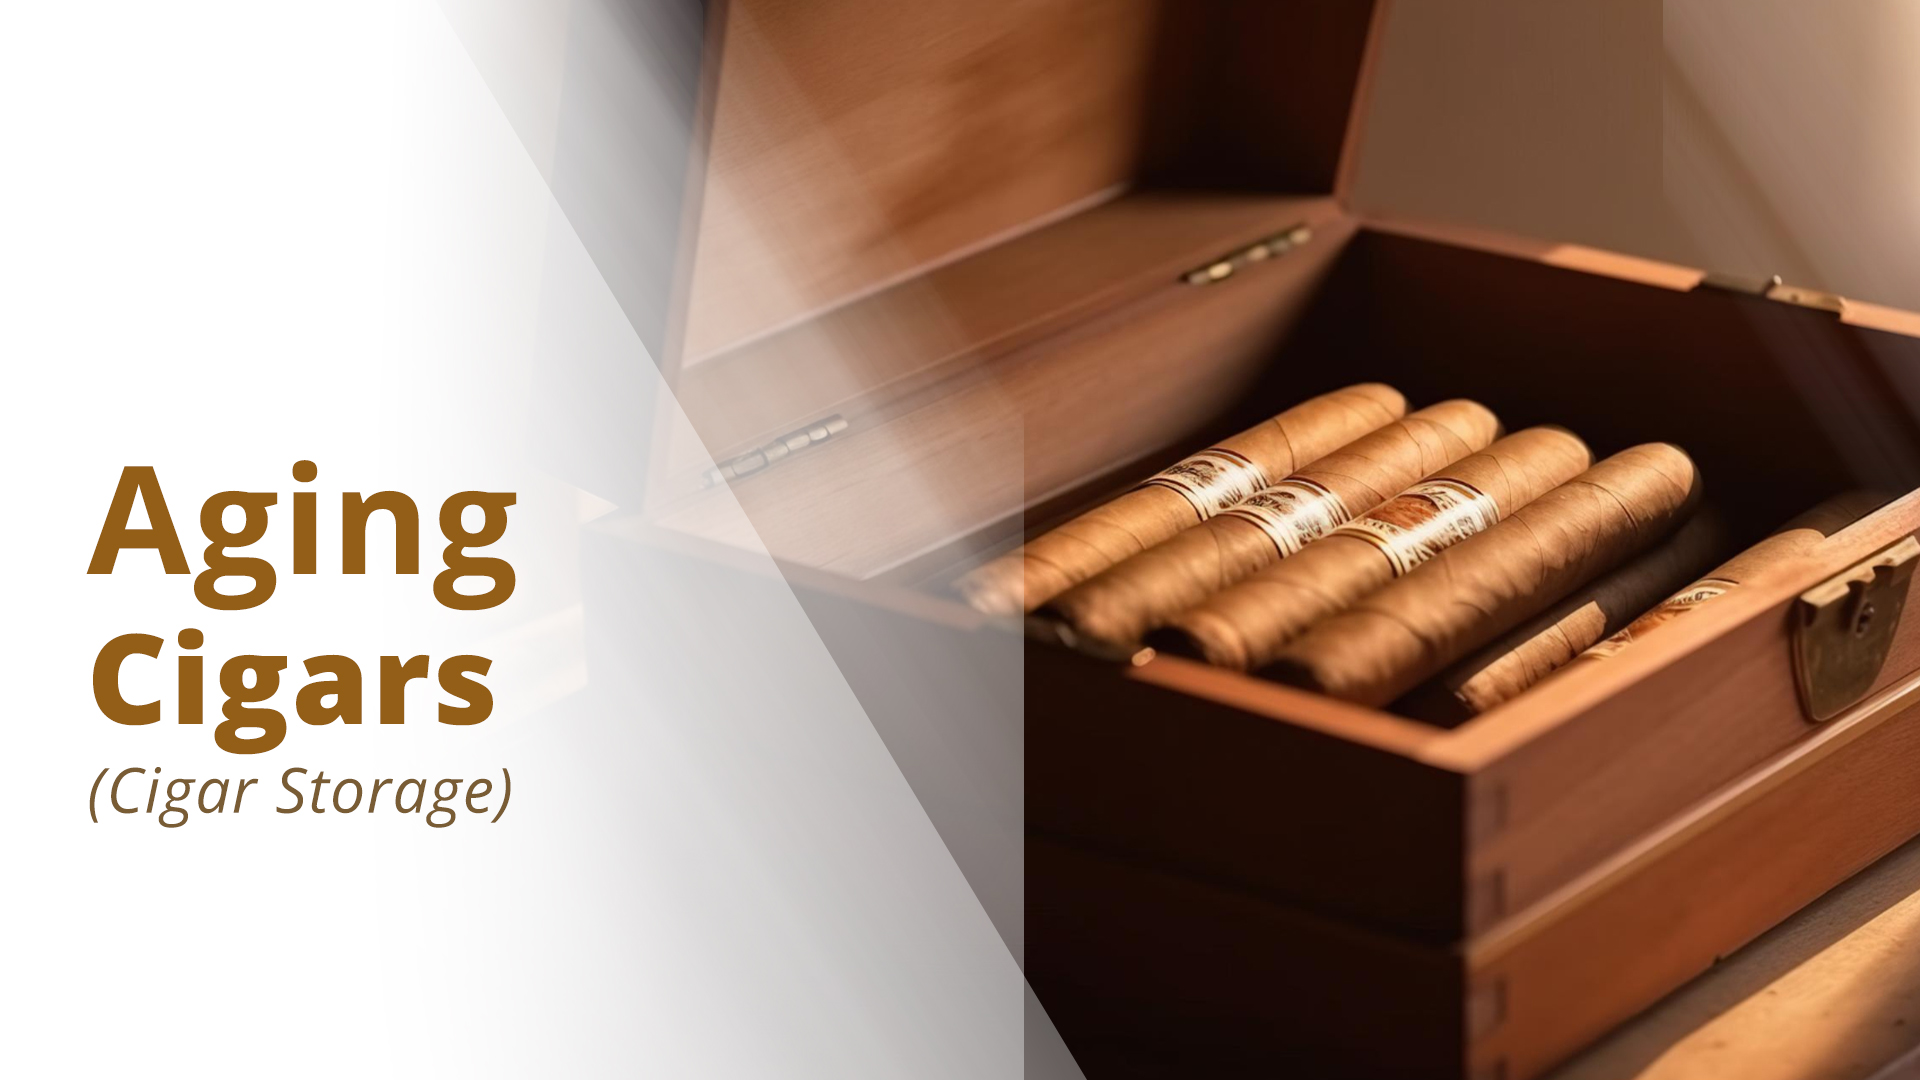 Aging cigars